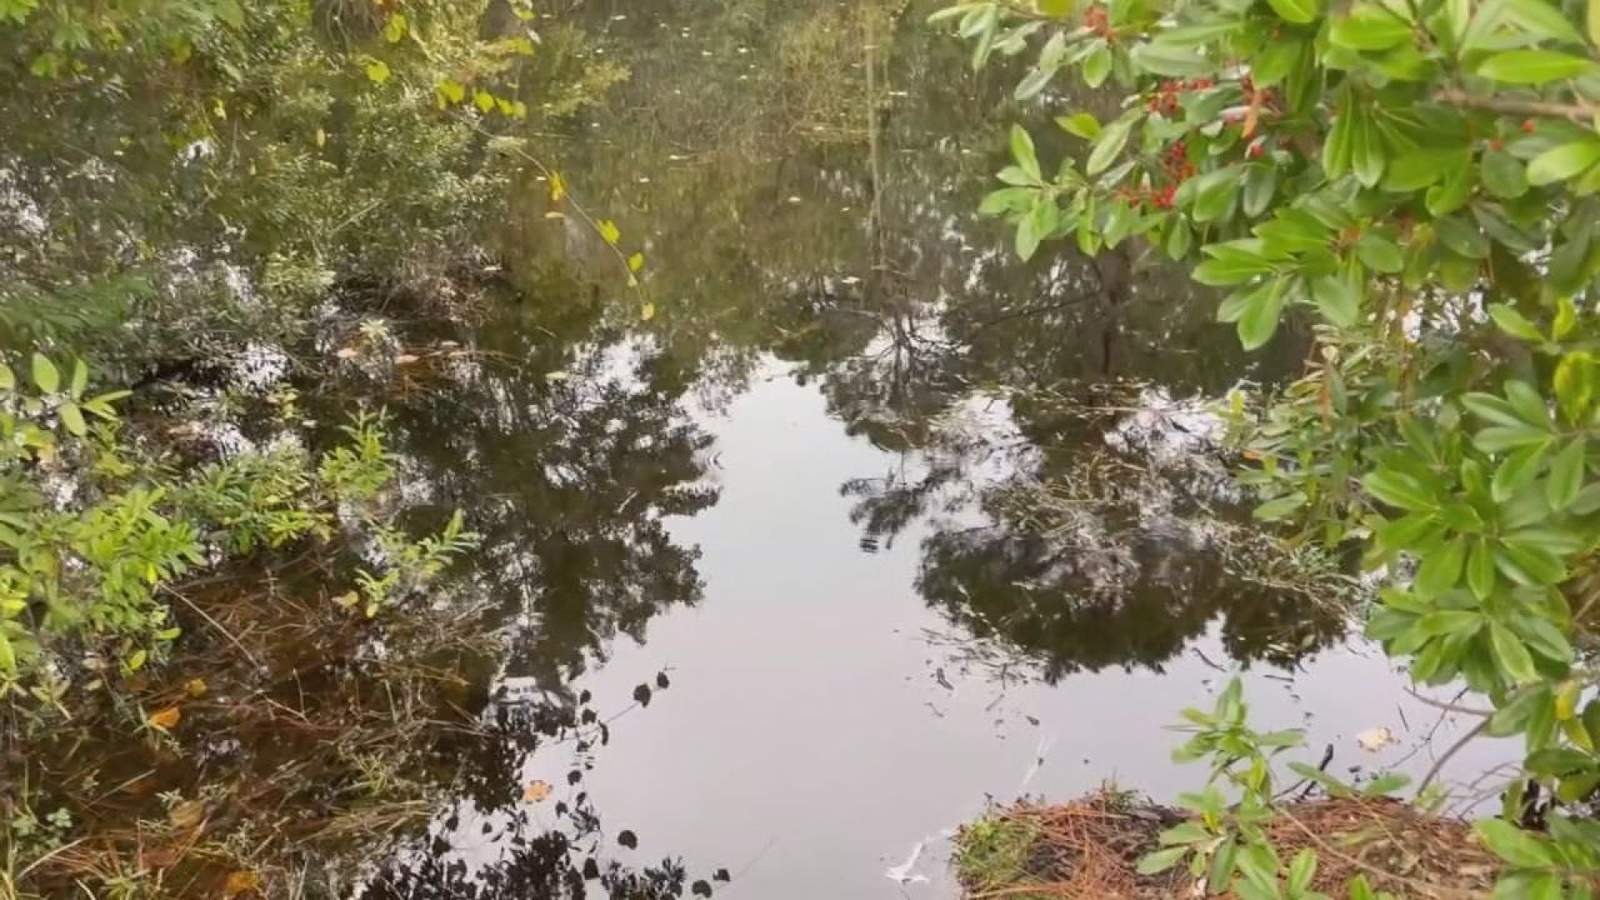 Naked body with gunshot found in plastic container in pond